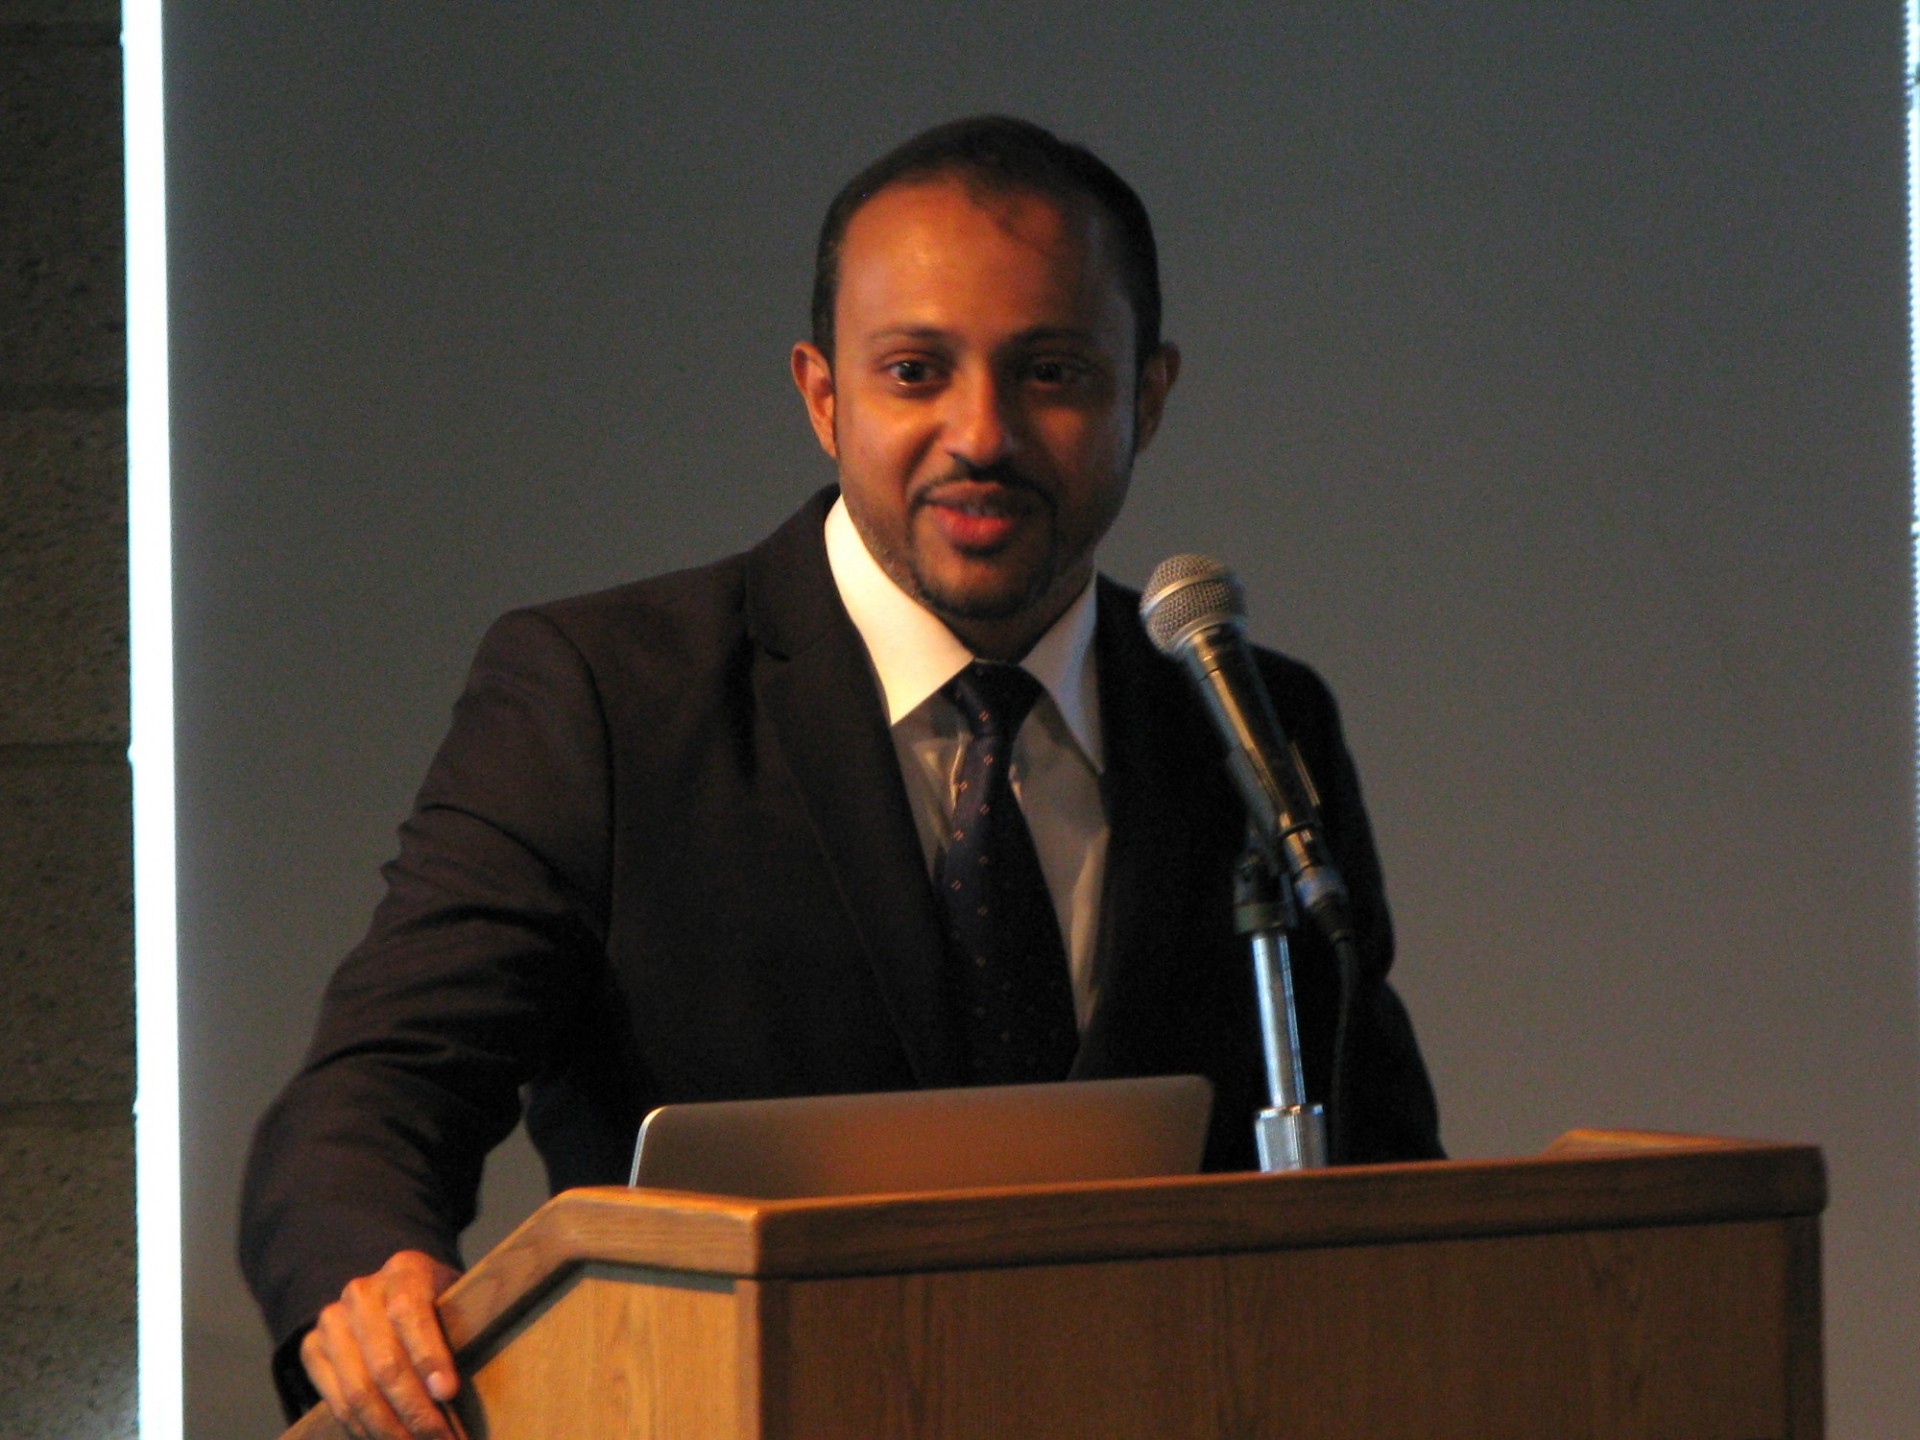 Somdeb Mitra, Assistant Director for Life Sciences, Bridge to the Ph.D. Program